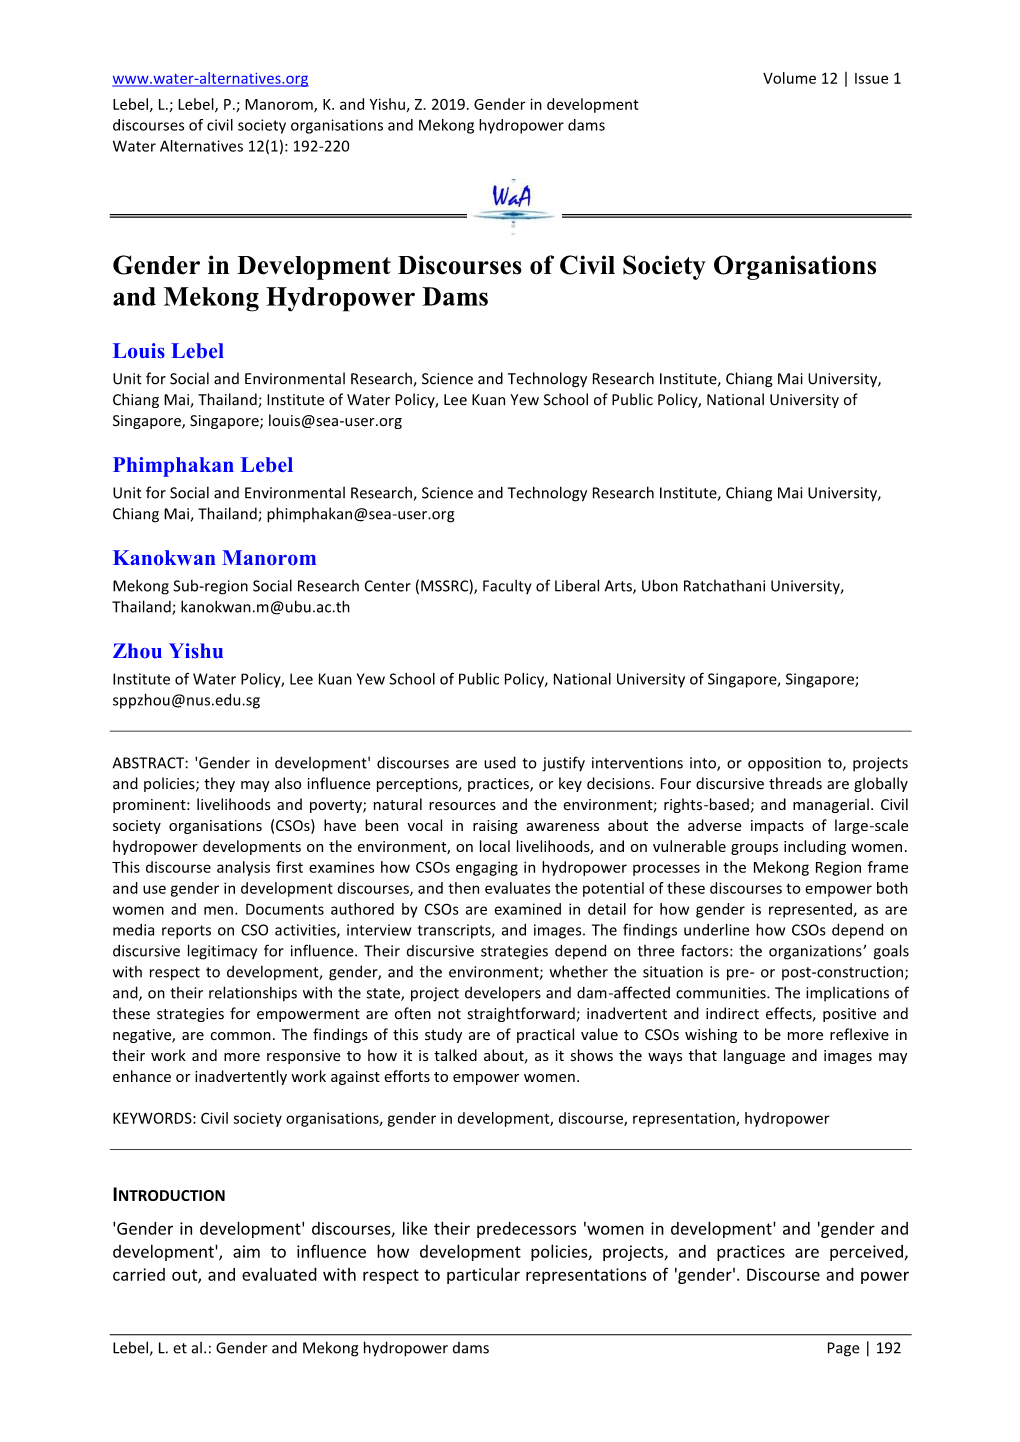 Gender in Development Discourses of Civil Society Organisations and Mekong Hydropower Dams Water Alternatives 12(1): 192-220